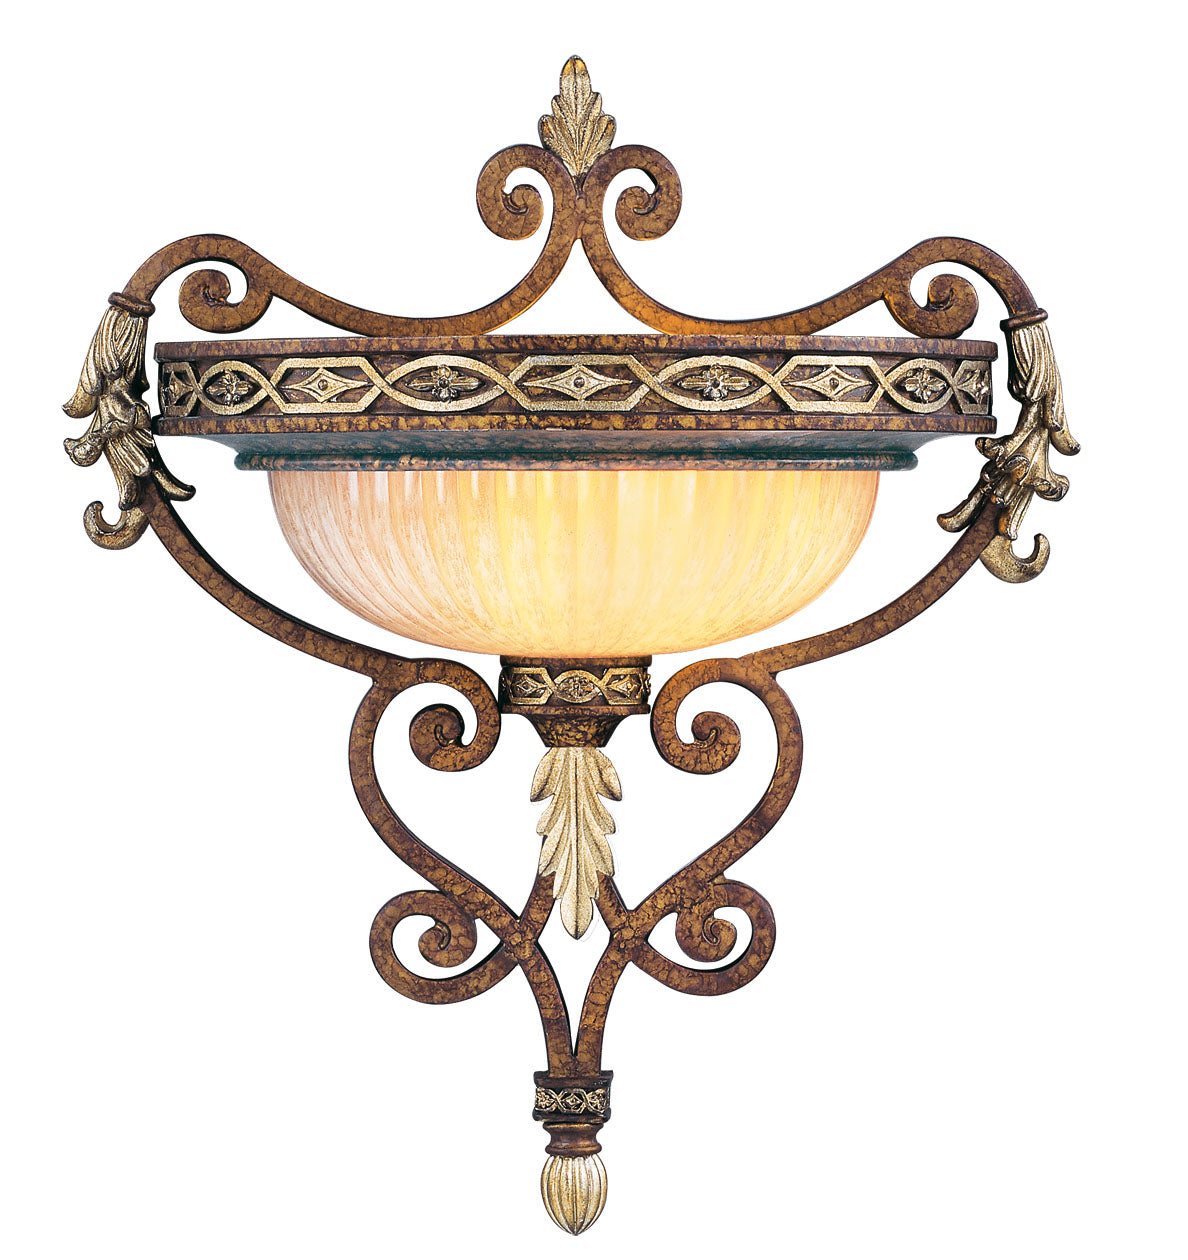 LIVEX Lighting 8531-64 Seville Wall Sconce in Palacial Bronze with Gilded Accents (1 Light)